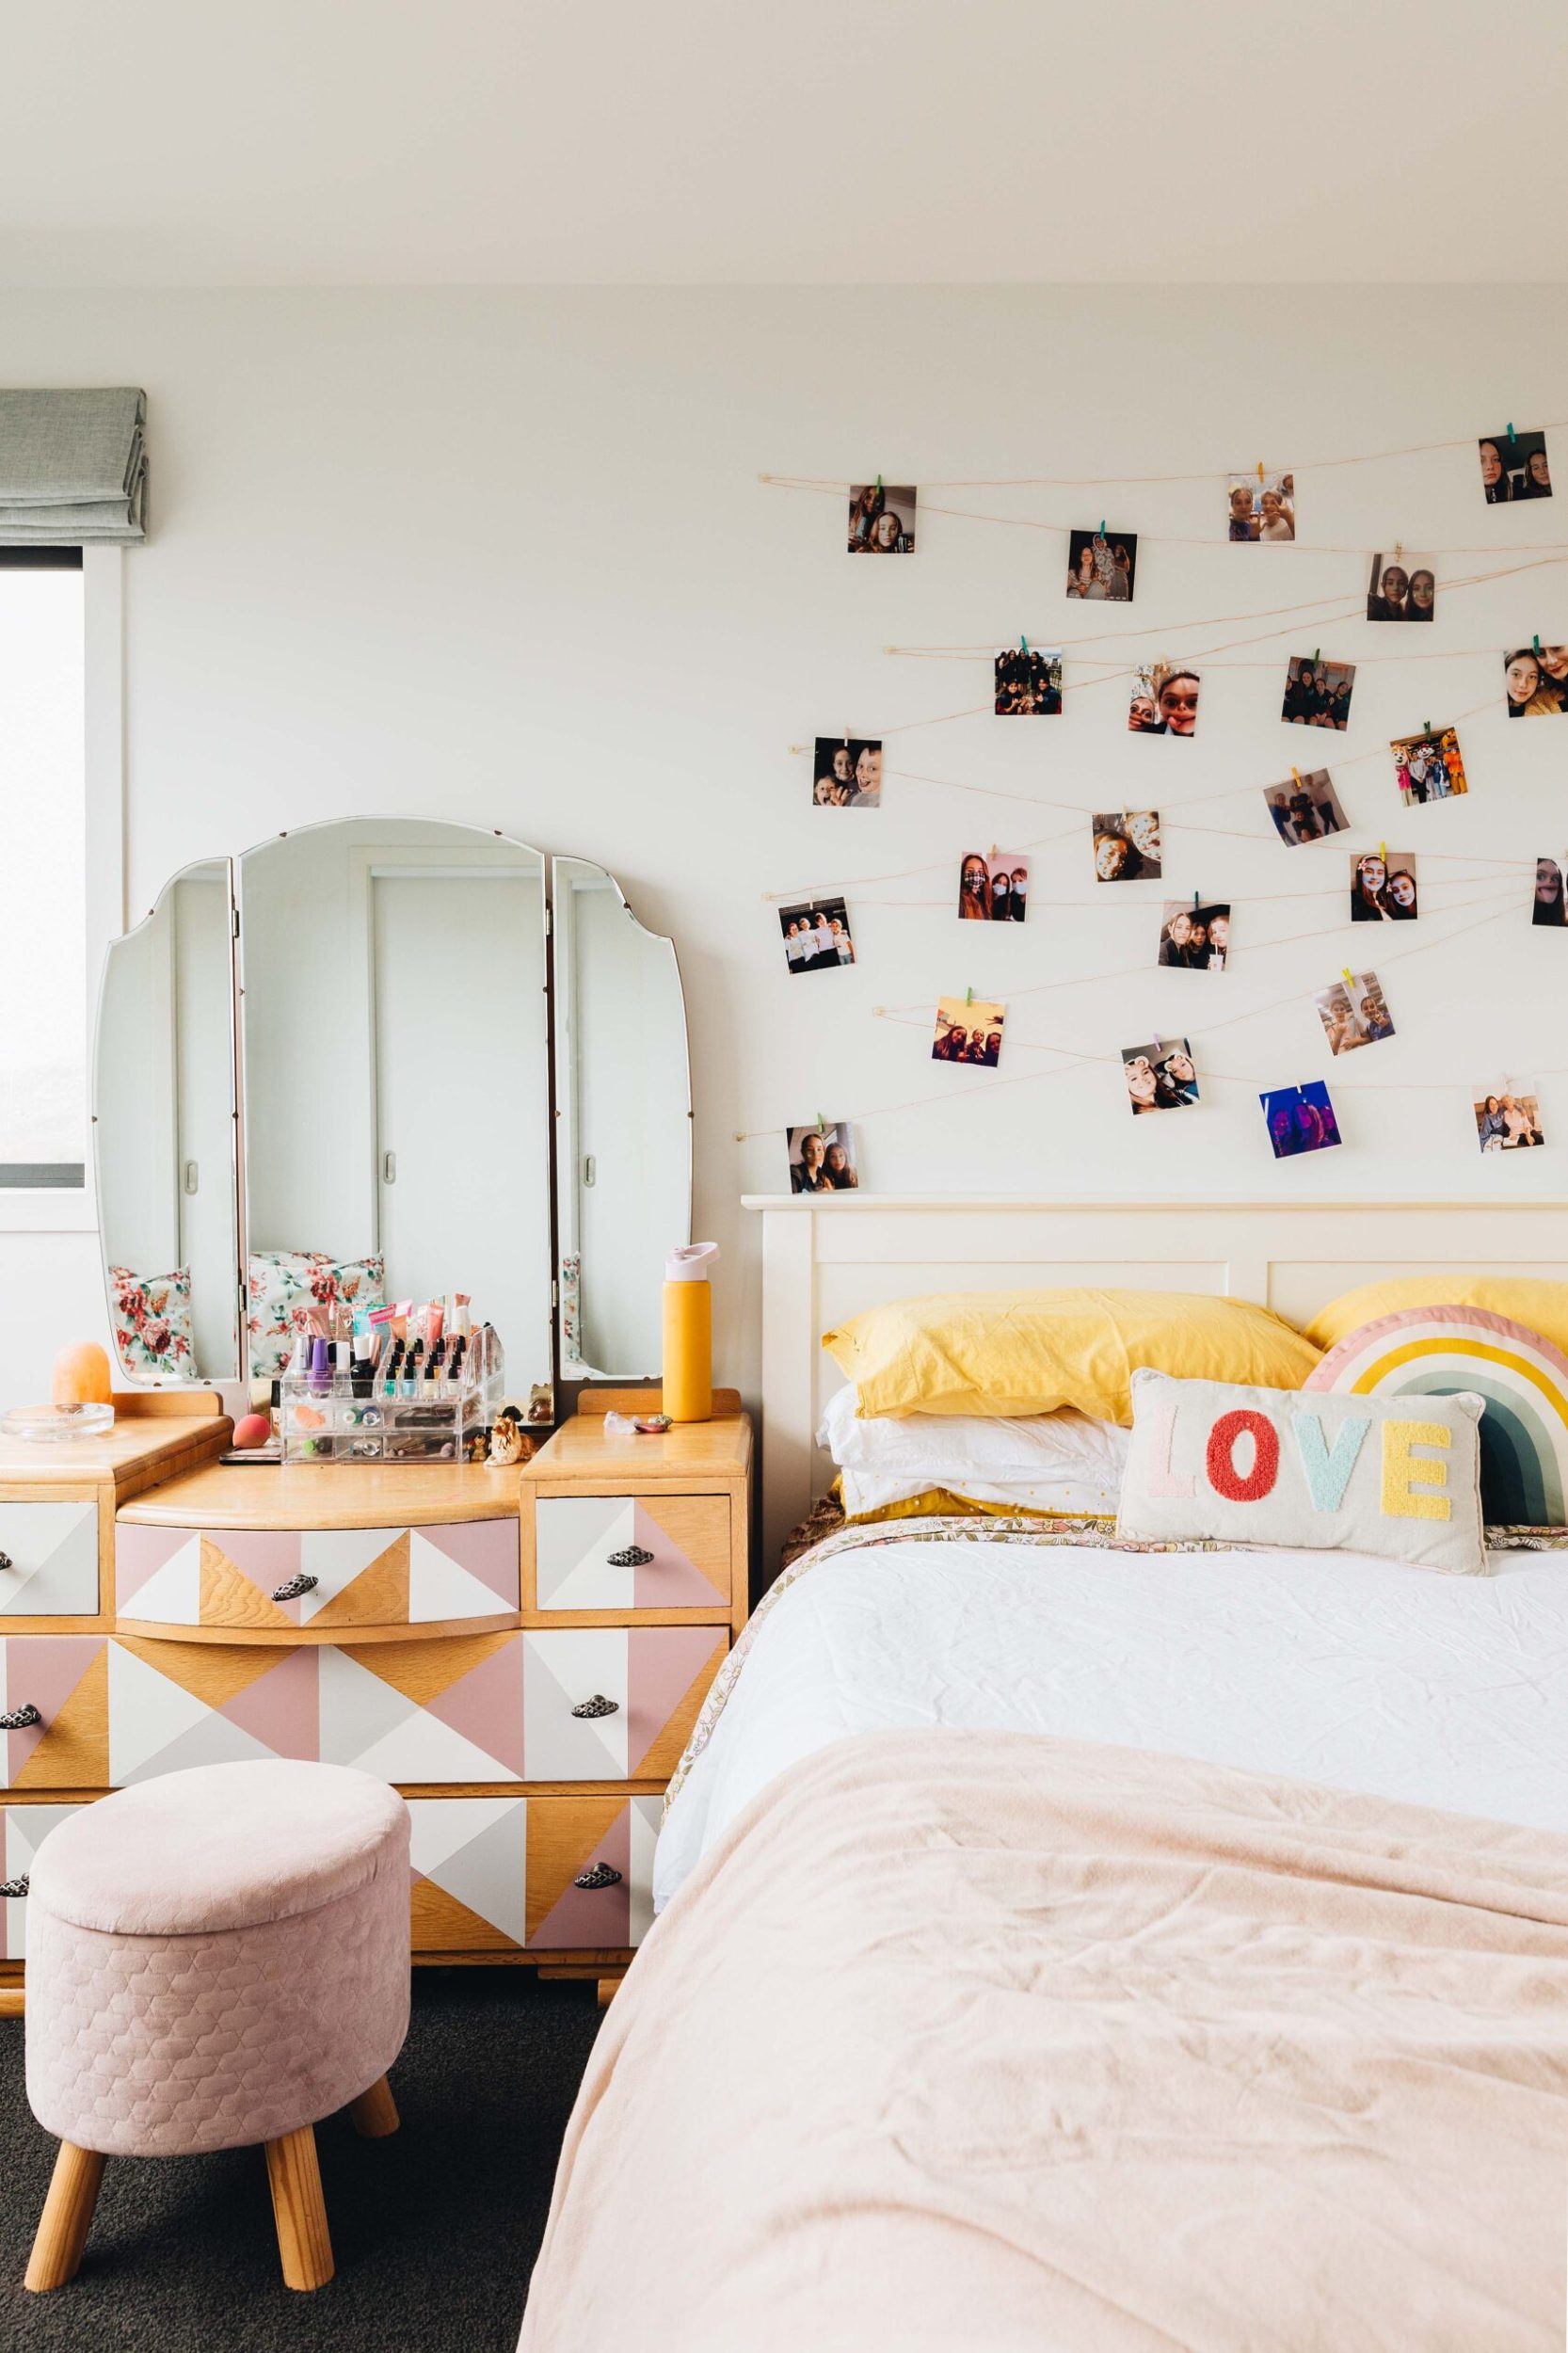 A little girls' room with a large bed and photos hanging on the wall, a pink and orange dresser with a pink stool